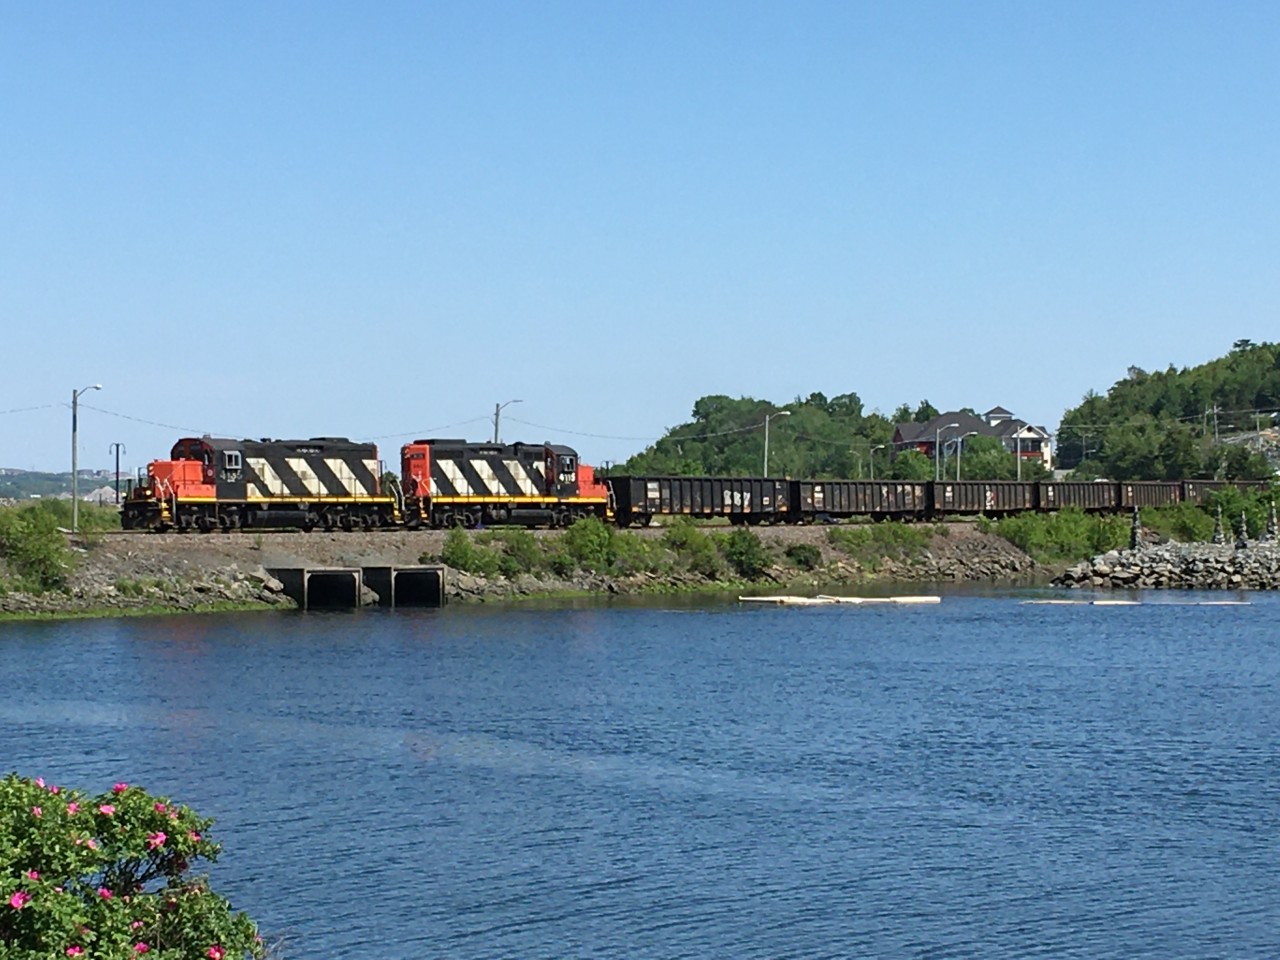 Marilynn Linley's image shows CN local 519 heading west at Moirs Mills in suburban Halifax.  Moirs Pond is in the foreground.  The train was outbound from Rockingham Yard to Milford with a cut of gondolas for gypsum loading at the National Gypsum mine at Mileage 36.6 of the Bedford Subdivision.  Marilynn shot with her cellphone at  3.53 p.m. on Thursday, June 18, 2020.   It was our first train sighting in over three months since we saw CSX GE 5355 on a local in North Carolina.  

I did not expect that our trip to our grandaughter's drive-by birthday parade would include a train, so the Nikon stayed in Port Lorne.  We did make planned stops at Costco and Starbucks.   

The local featured two classic CN locomotives, both remanufactured GMDL GP9s from the late 1950s.  The CNR bought the leader, 4135, as GR-17h class 4528 in 1957 and remanufactured it at their Point St. Charles Shops in Montreal in 1991.   Designed for road switcher service, in class GR-418f, it's driving position was reversed to a short-hood-forward orientation.  CN rebuilt forty-four similar units between March 1984 and May 1991.    Between September 1981 and 1984, CN similarly rebuilt thirty-seven other GP9s in the 4000 series.  The earlier rebuilt units were 9,000 pounds heavier.  The trailing unit, 4115, was formerly GR-17u 4322 of 1959.  CN assigned it to class GR-418d.